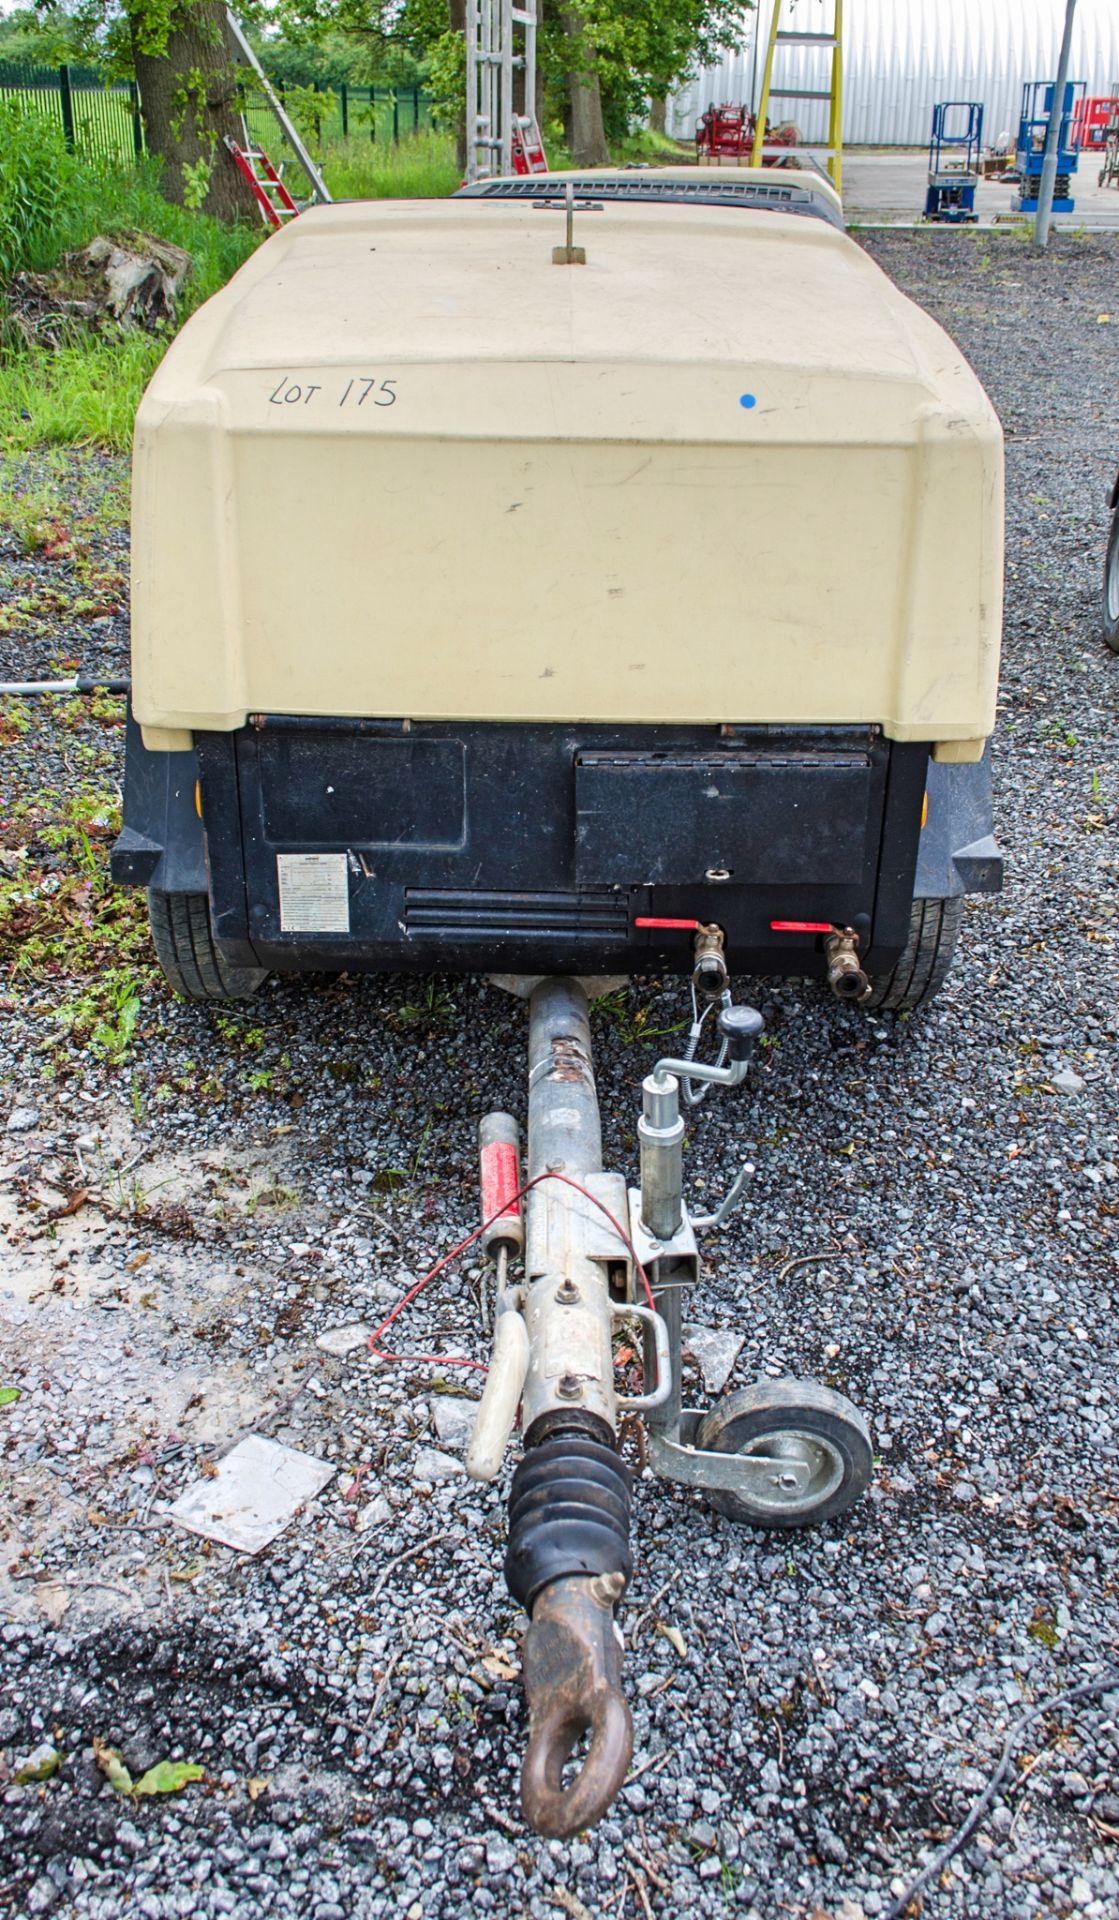 Doosan 741+ diesel driven mobile air compressor Year: 2012 S/N: 431090 Recorded Hours: 1770 AC434 - Image 3 of 6